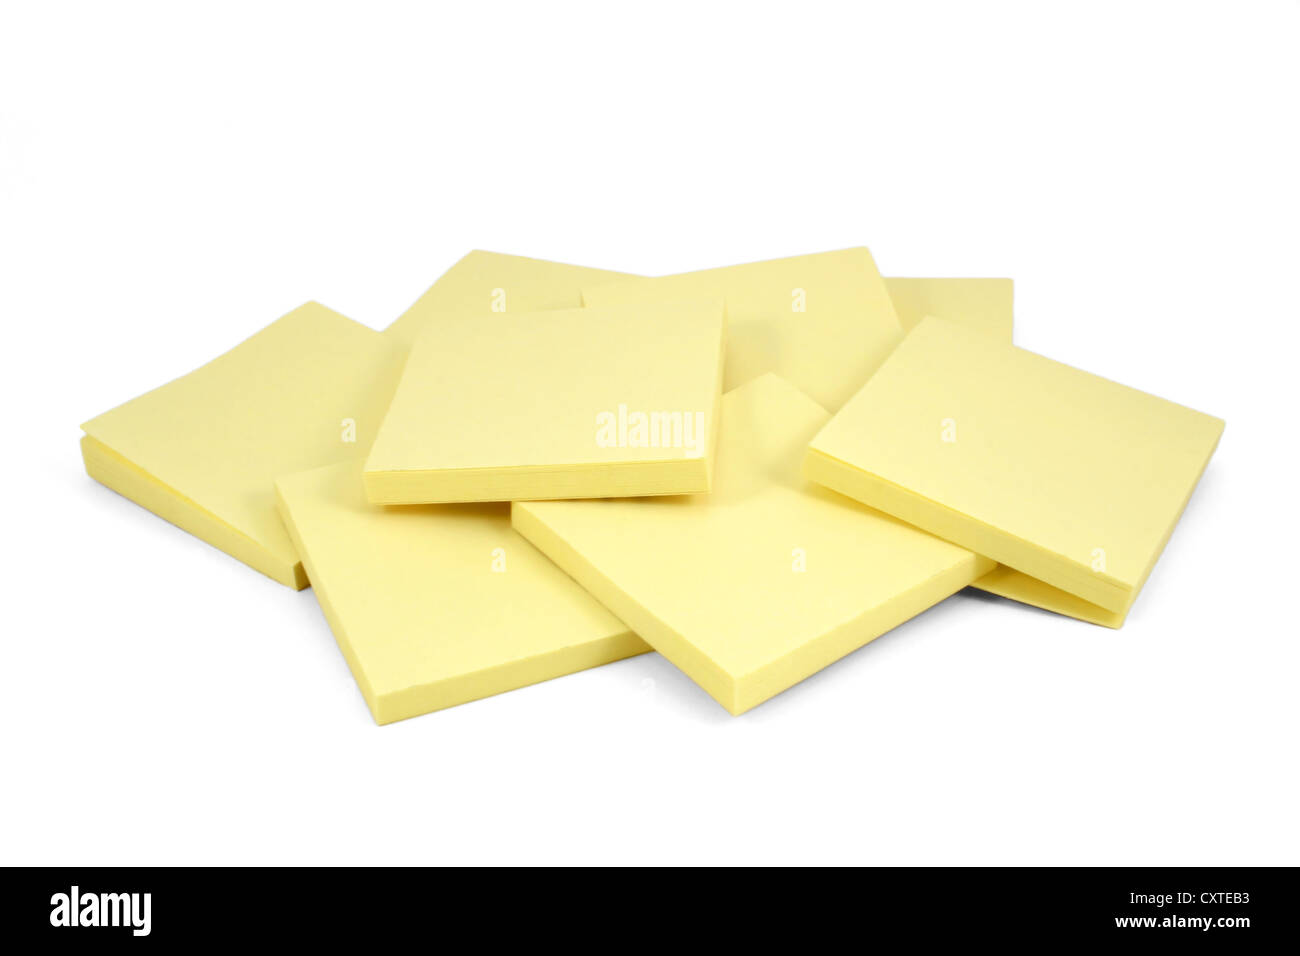 A pile of stickty pads against a white background Stock Photo